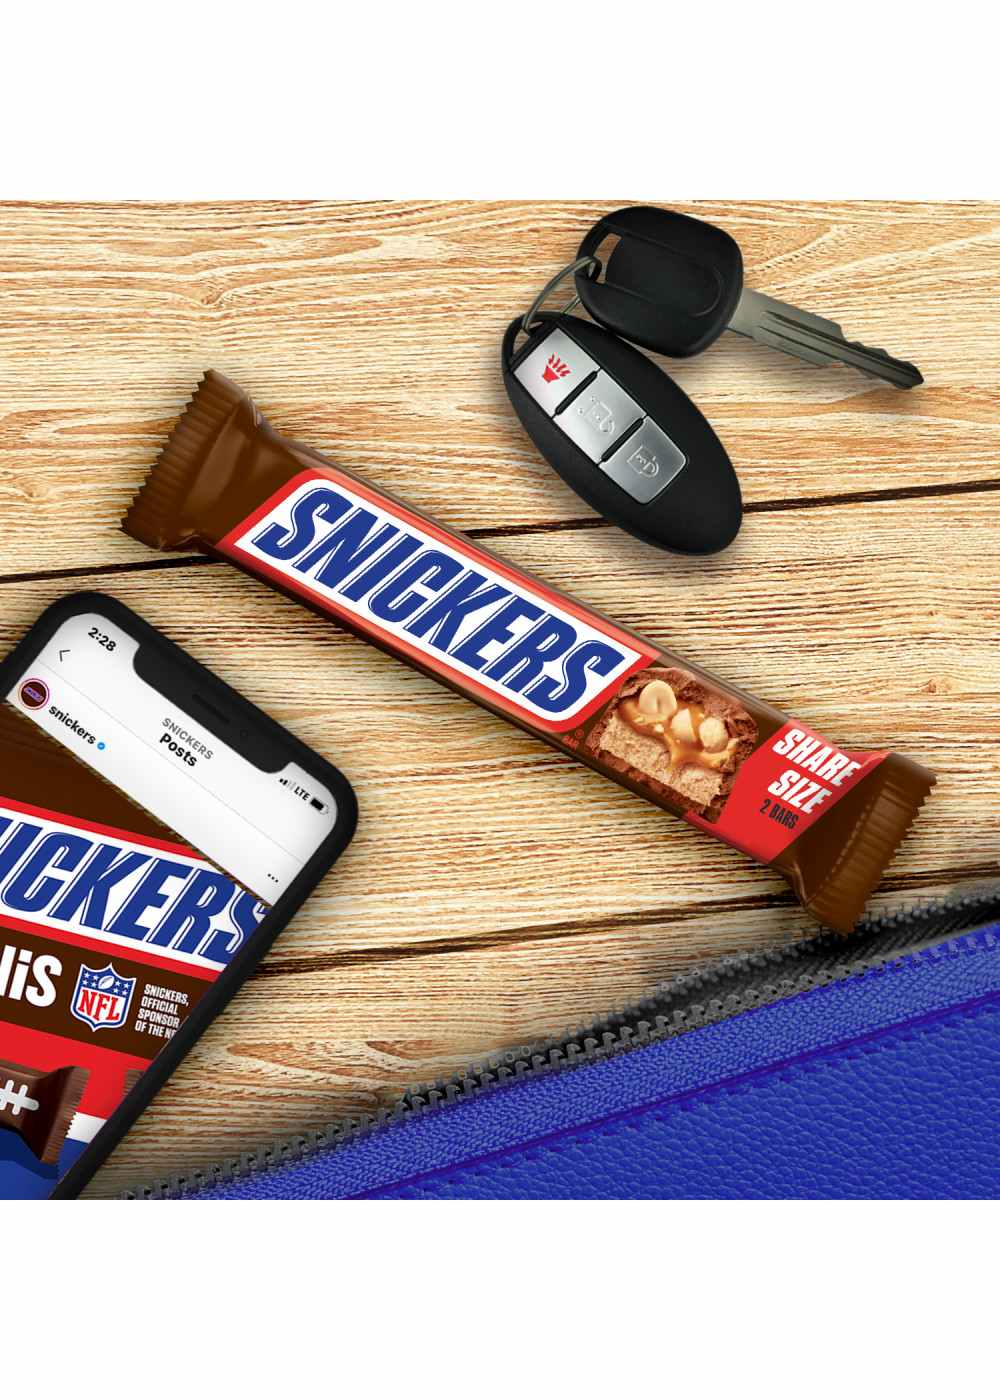 Snickers Milk Chocolate Candy Bar - Share Size; image 4 of 8